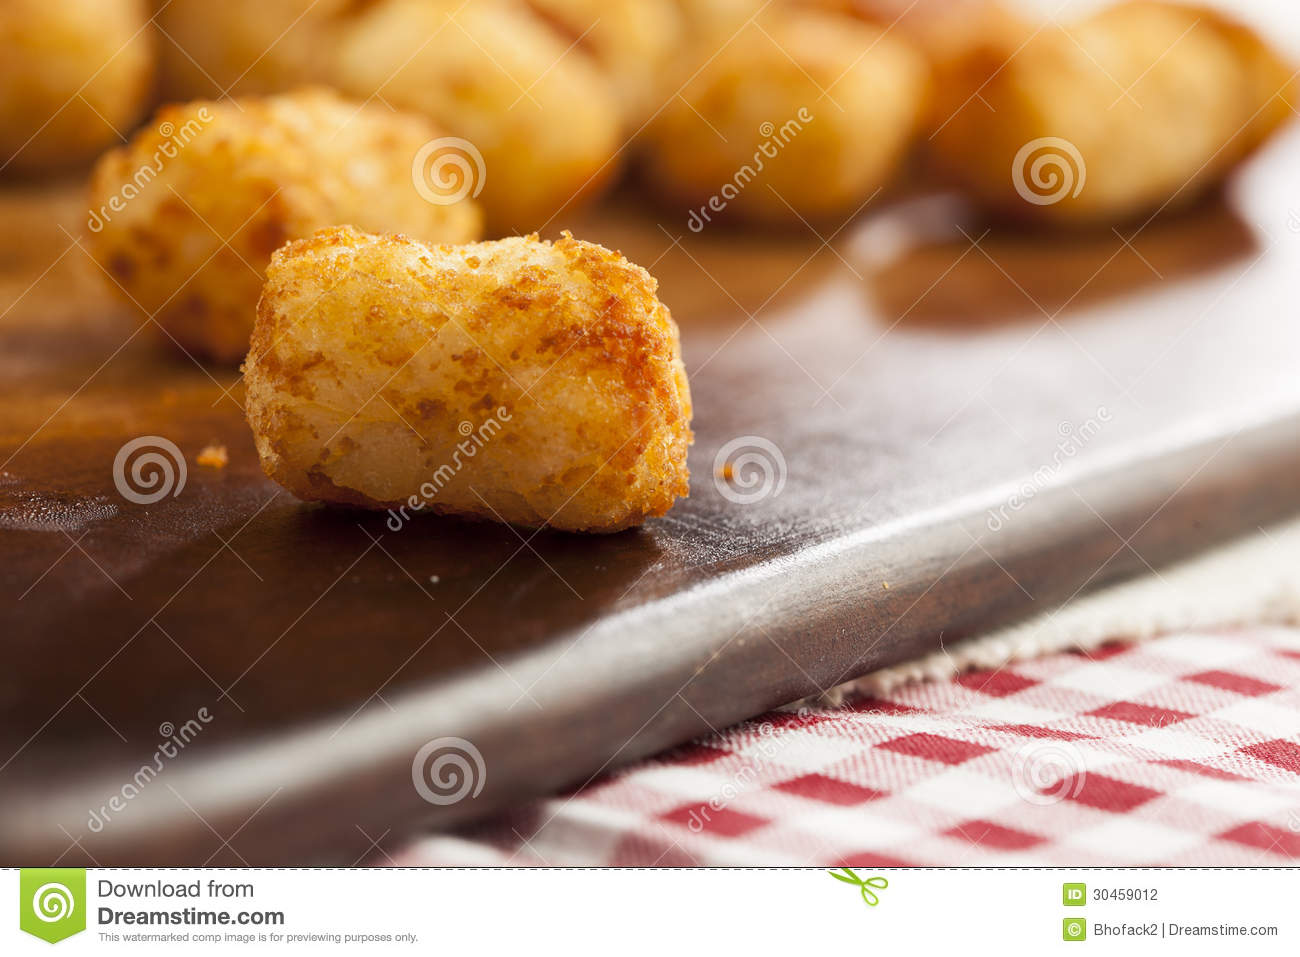 Organic Fried Tater Tots Stock Photography   Image  30459012